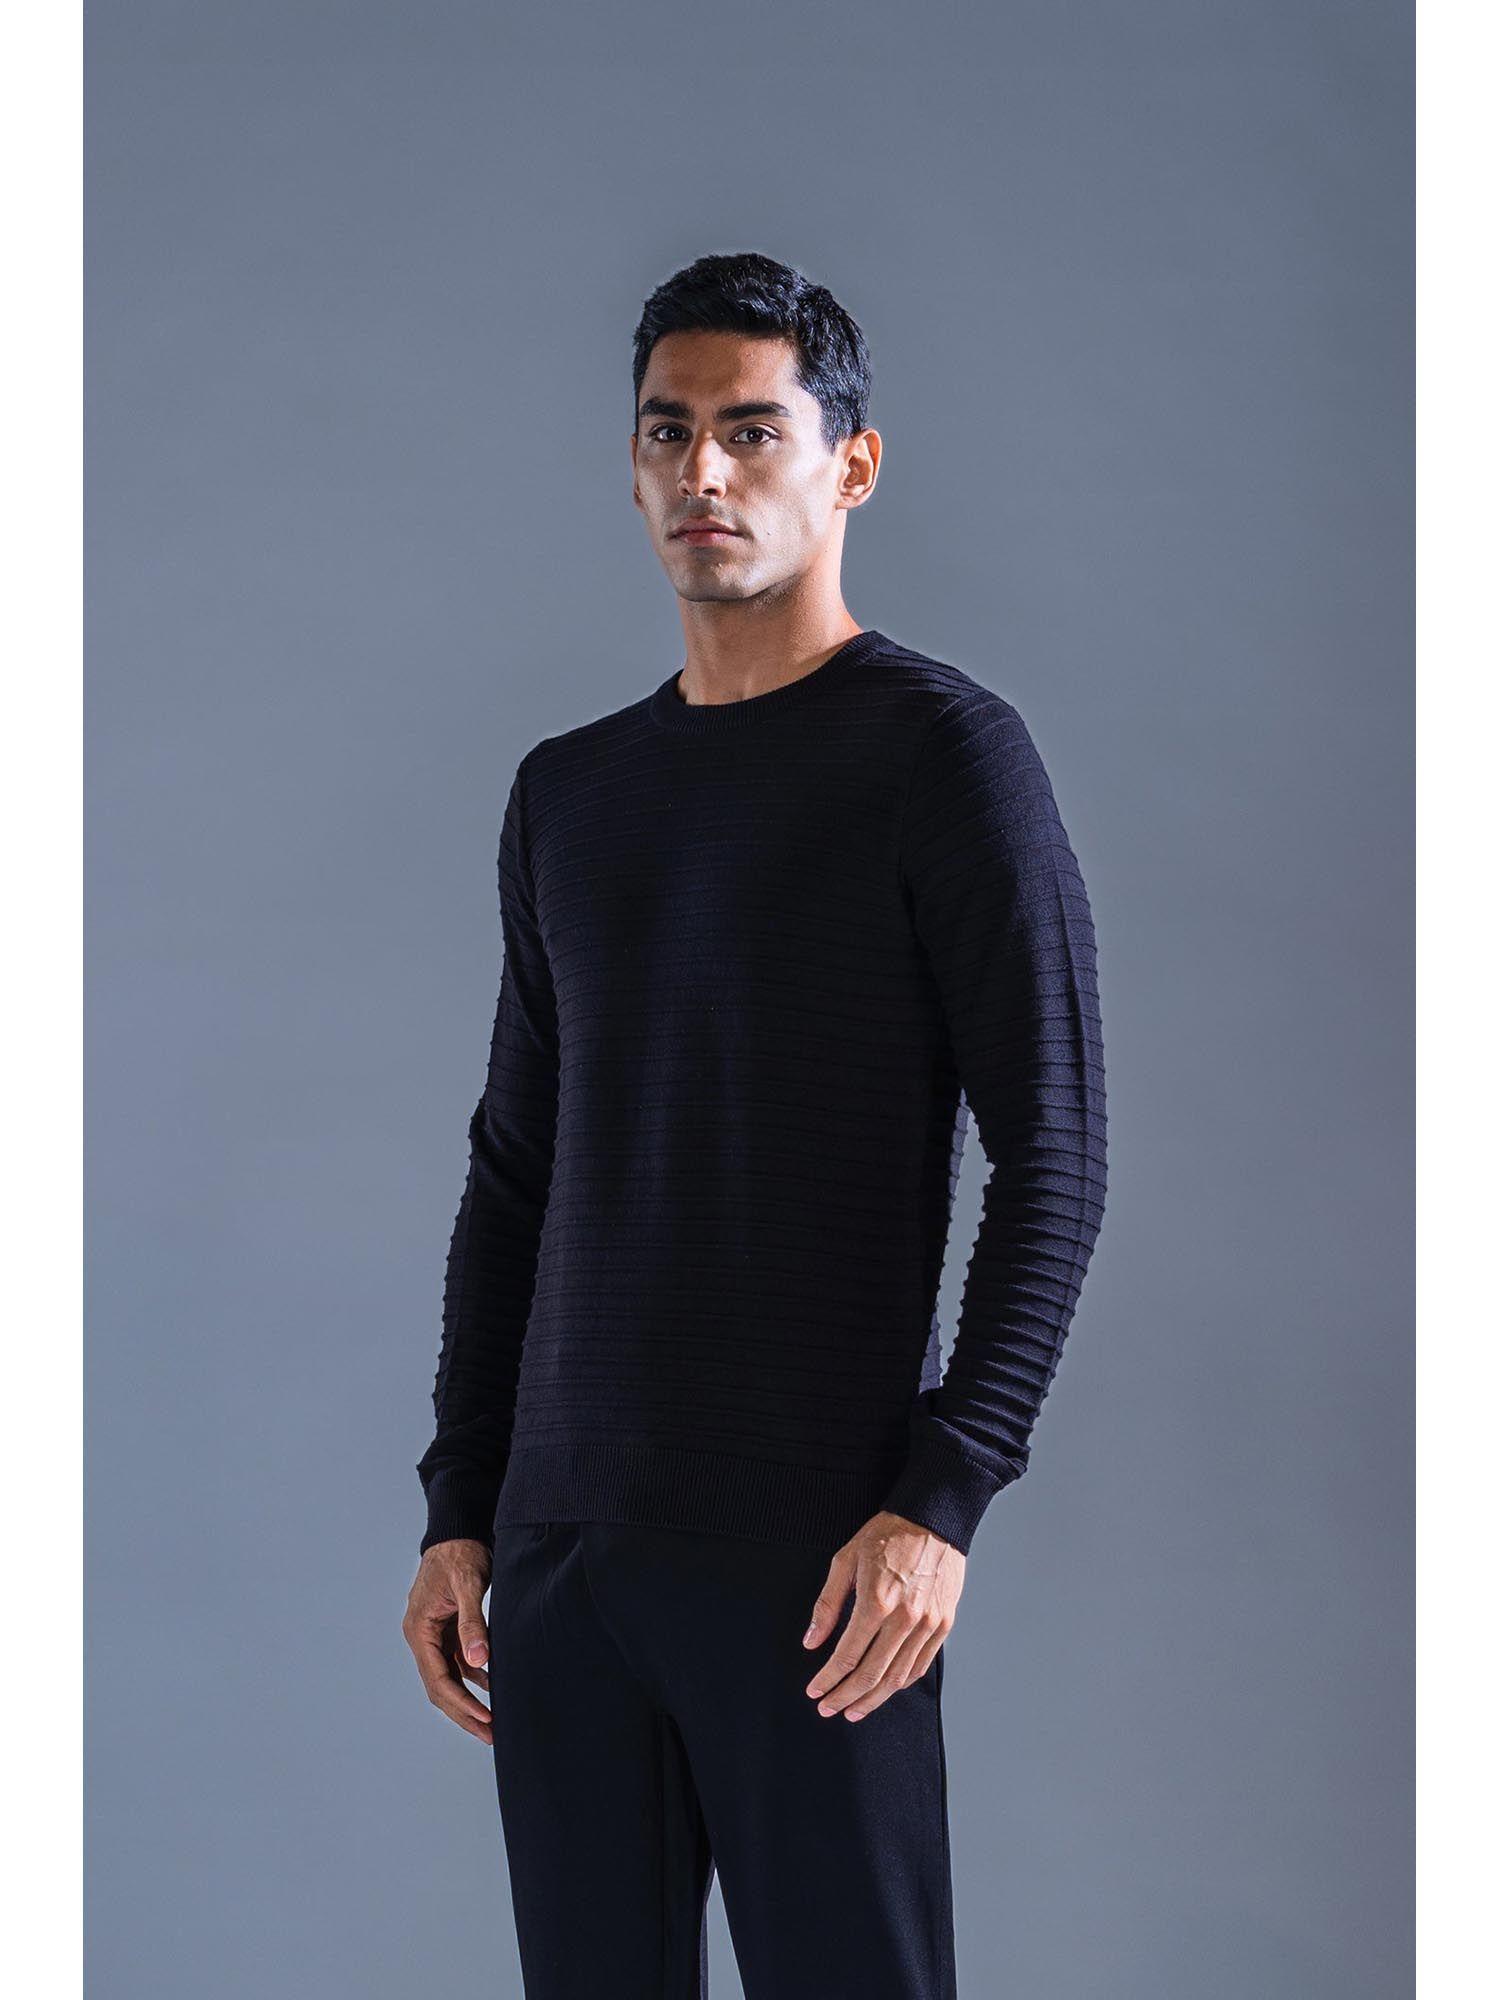 black-cotton-knit-sweater-classic-pull-over